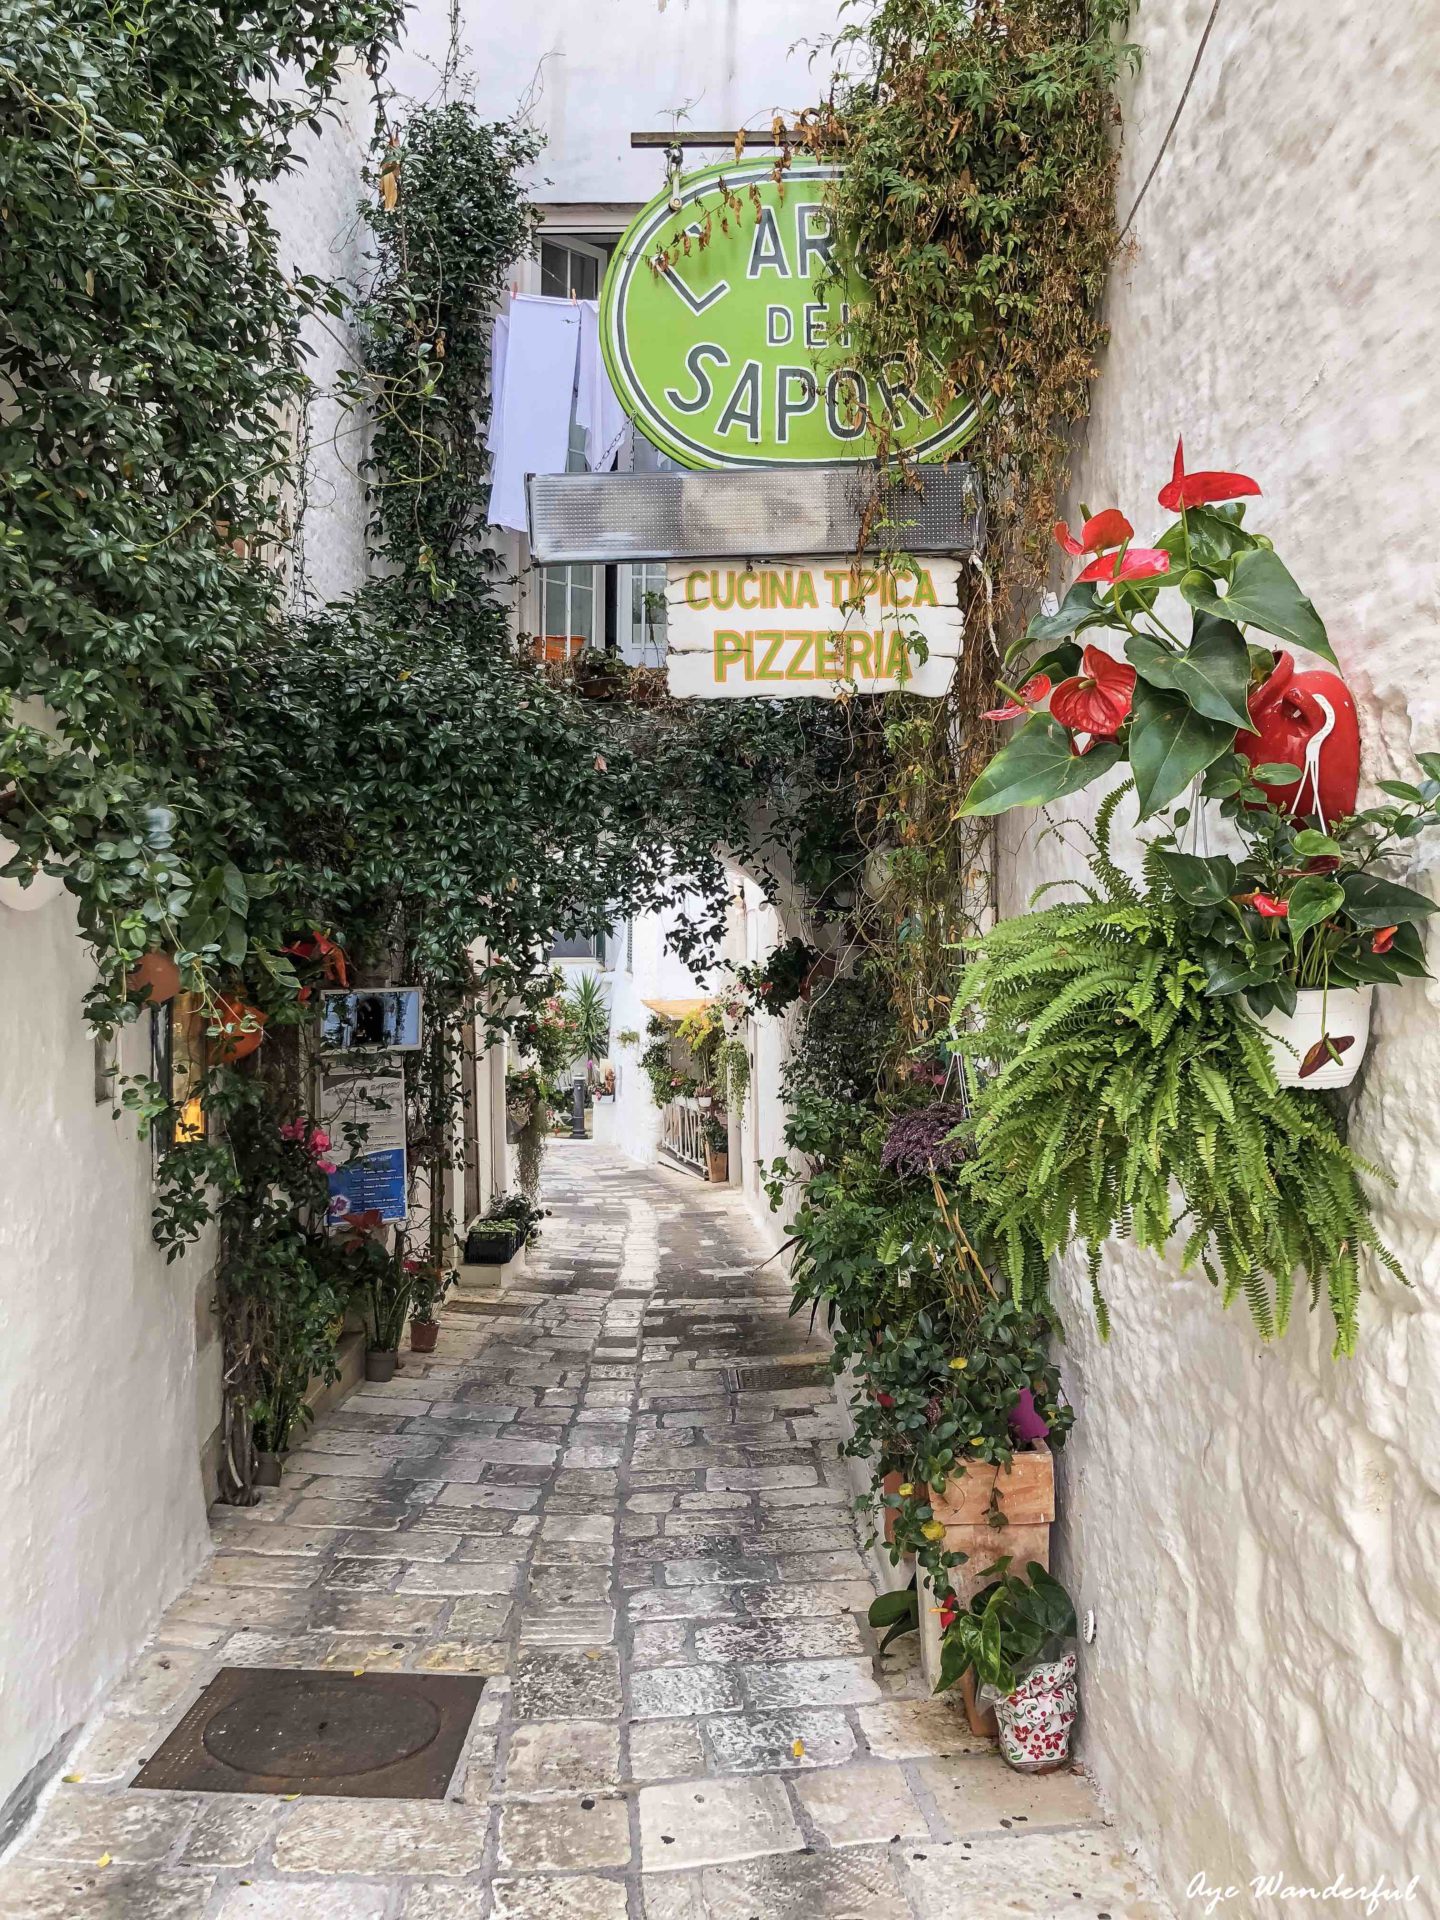 A travel guide for a quick getaway to Italy with everything you need to know about how to spend 2 days in Puglia in the charming towns of Ostuni and Alberobello.